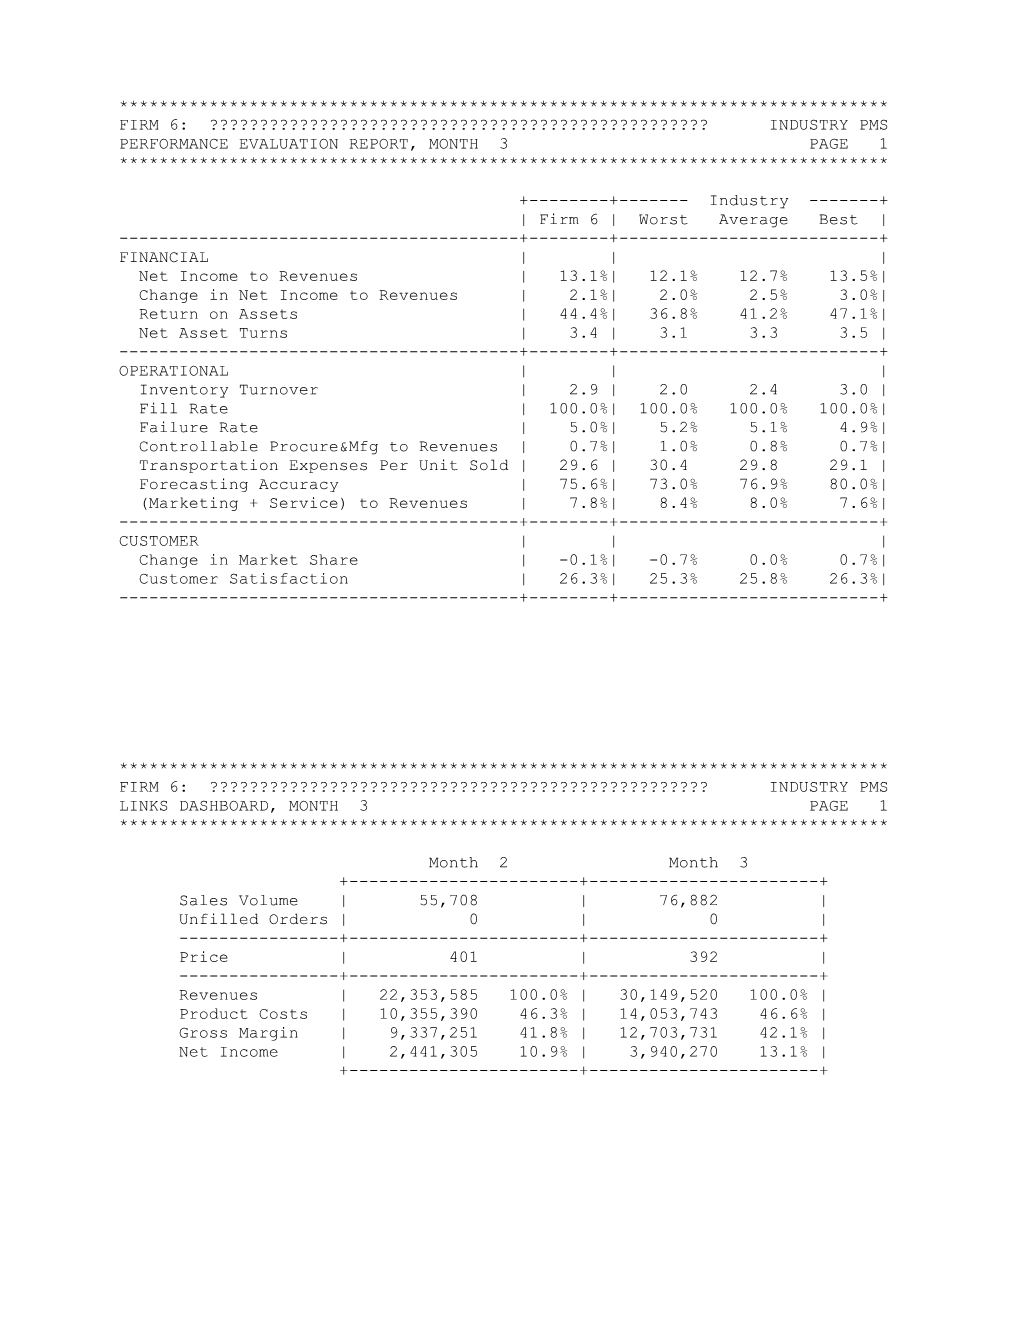 Performance Evaluation Report, Month 3 Page 1